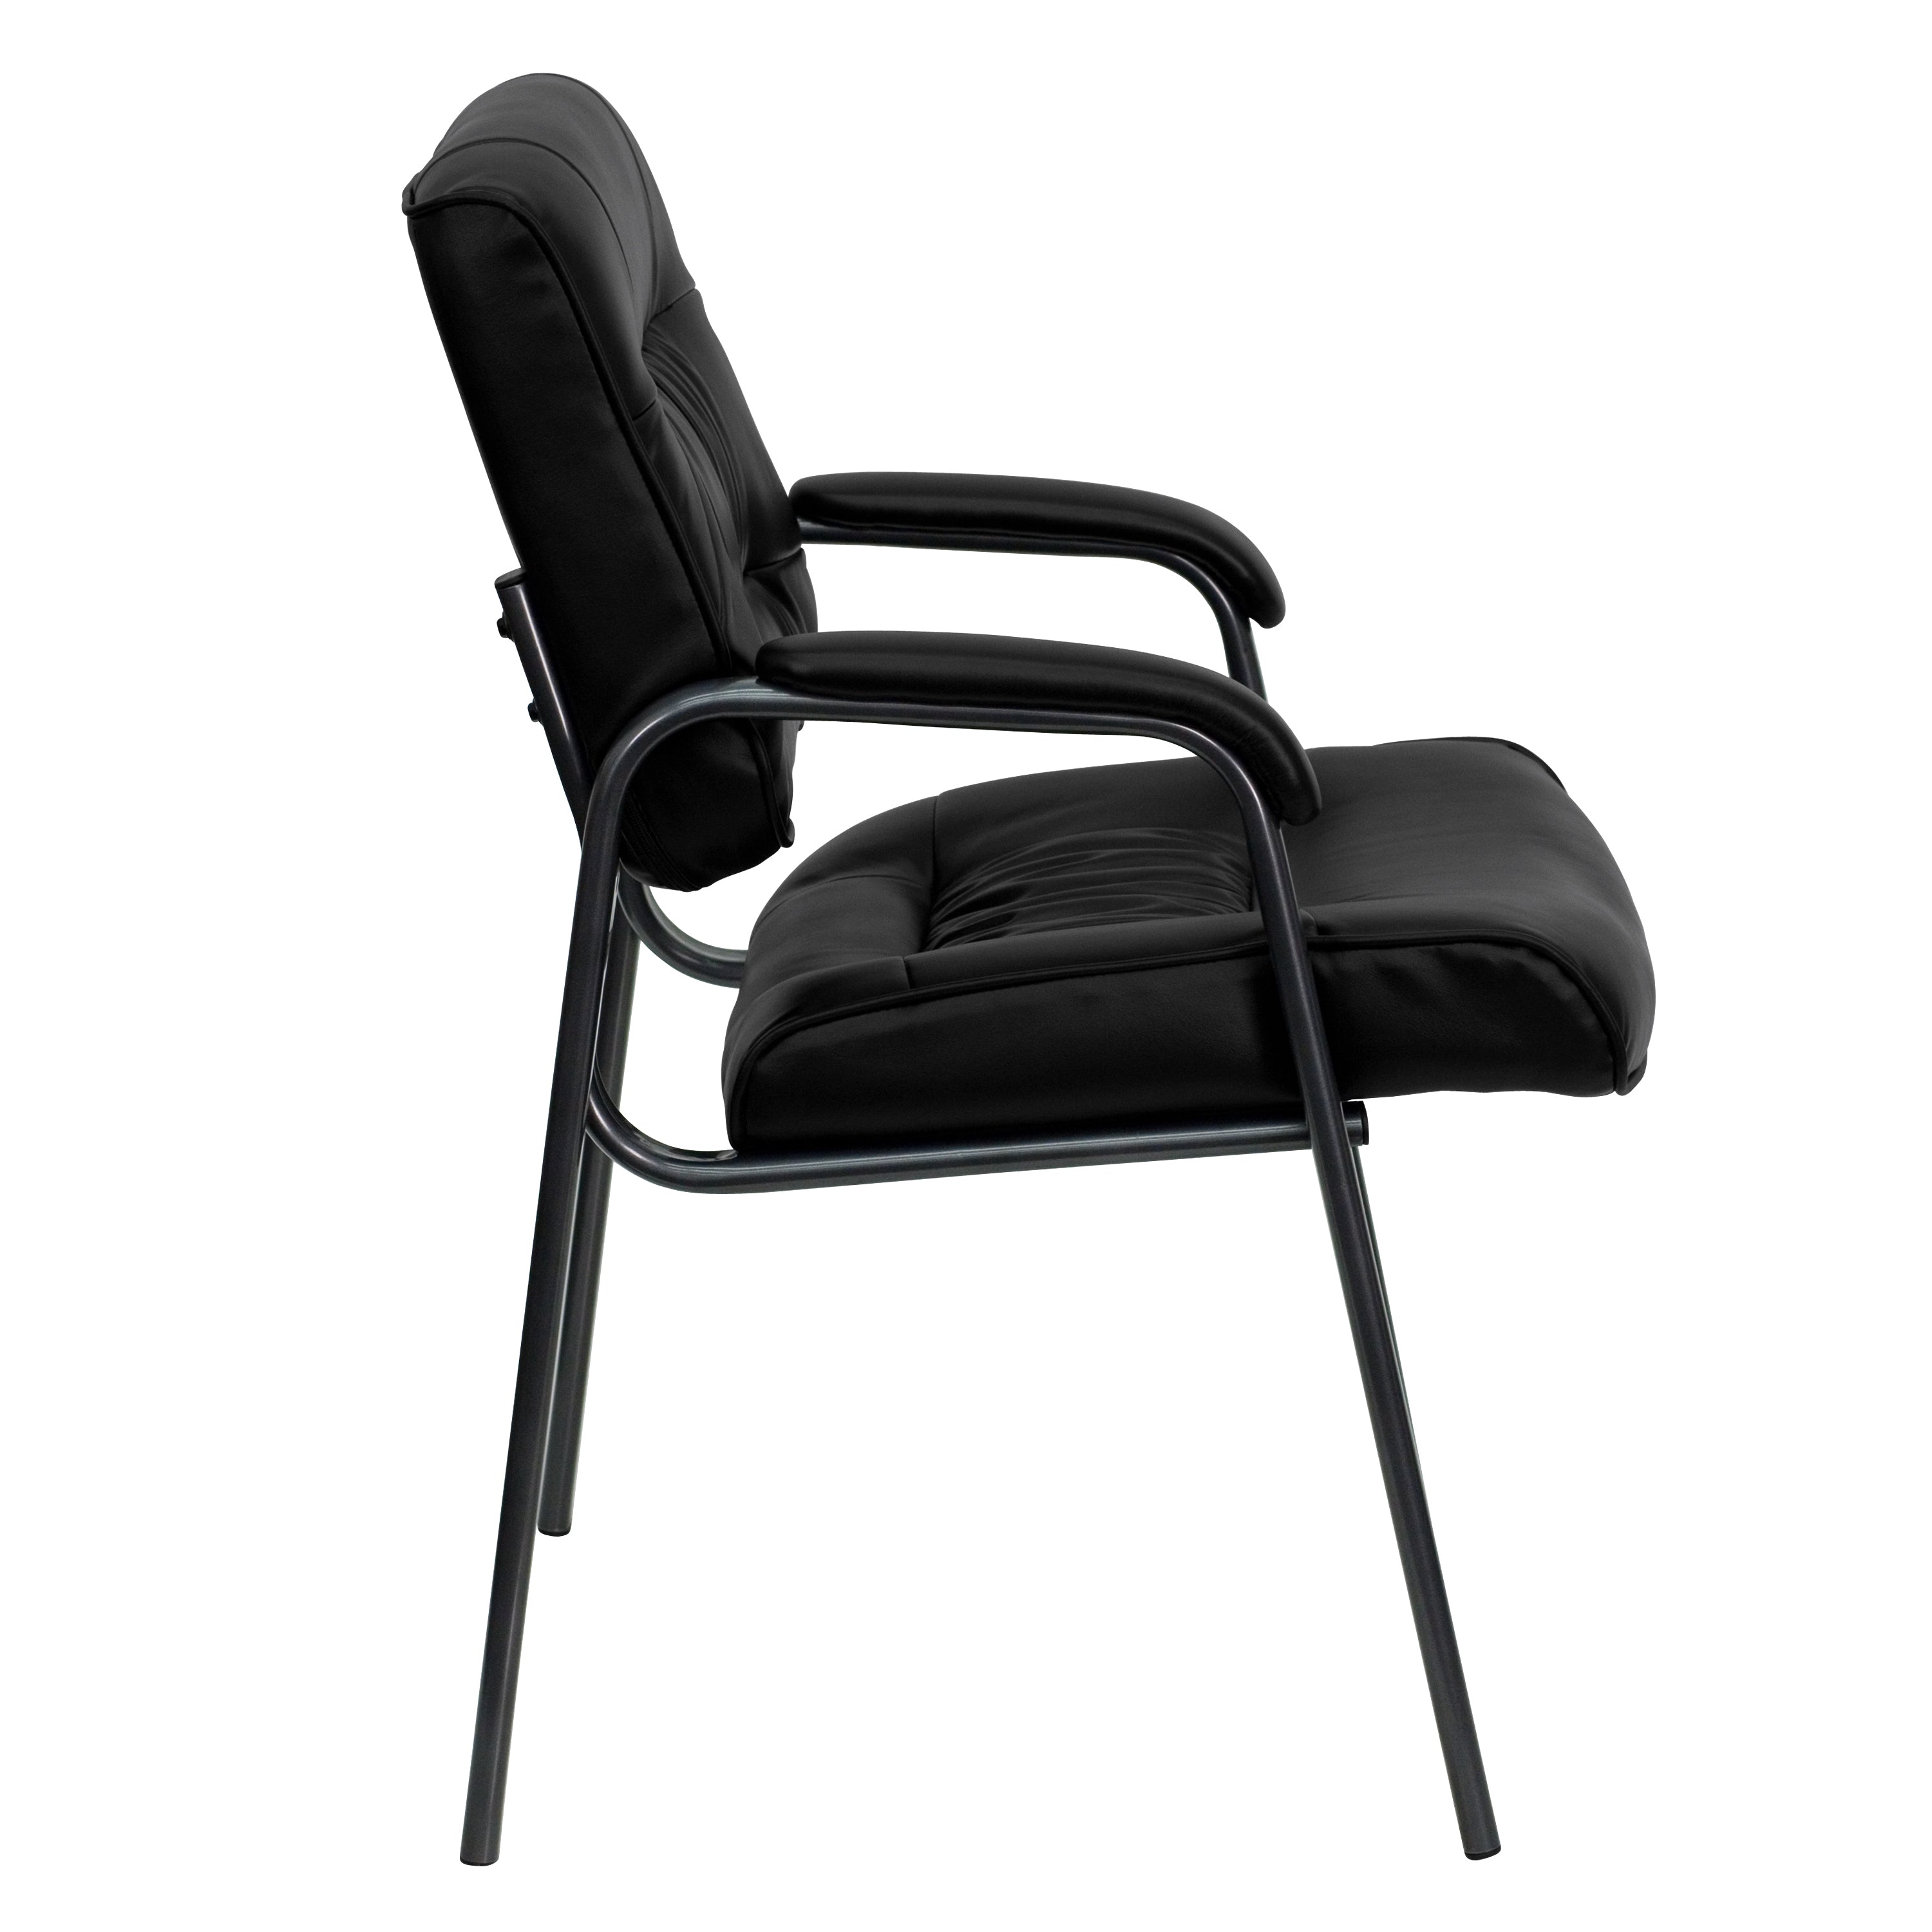 LeatherSoft Executive Side Reception Chair with Powder Coated Frame-Office Chair-Flash Furniture-Wall2Wall Furnishings